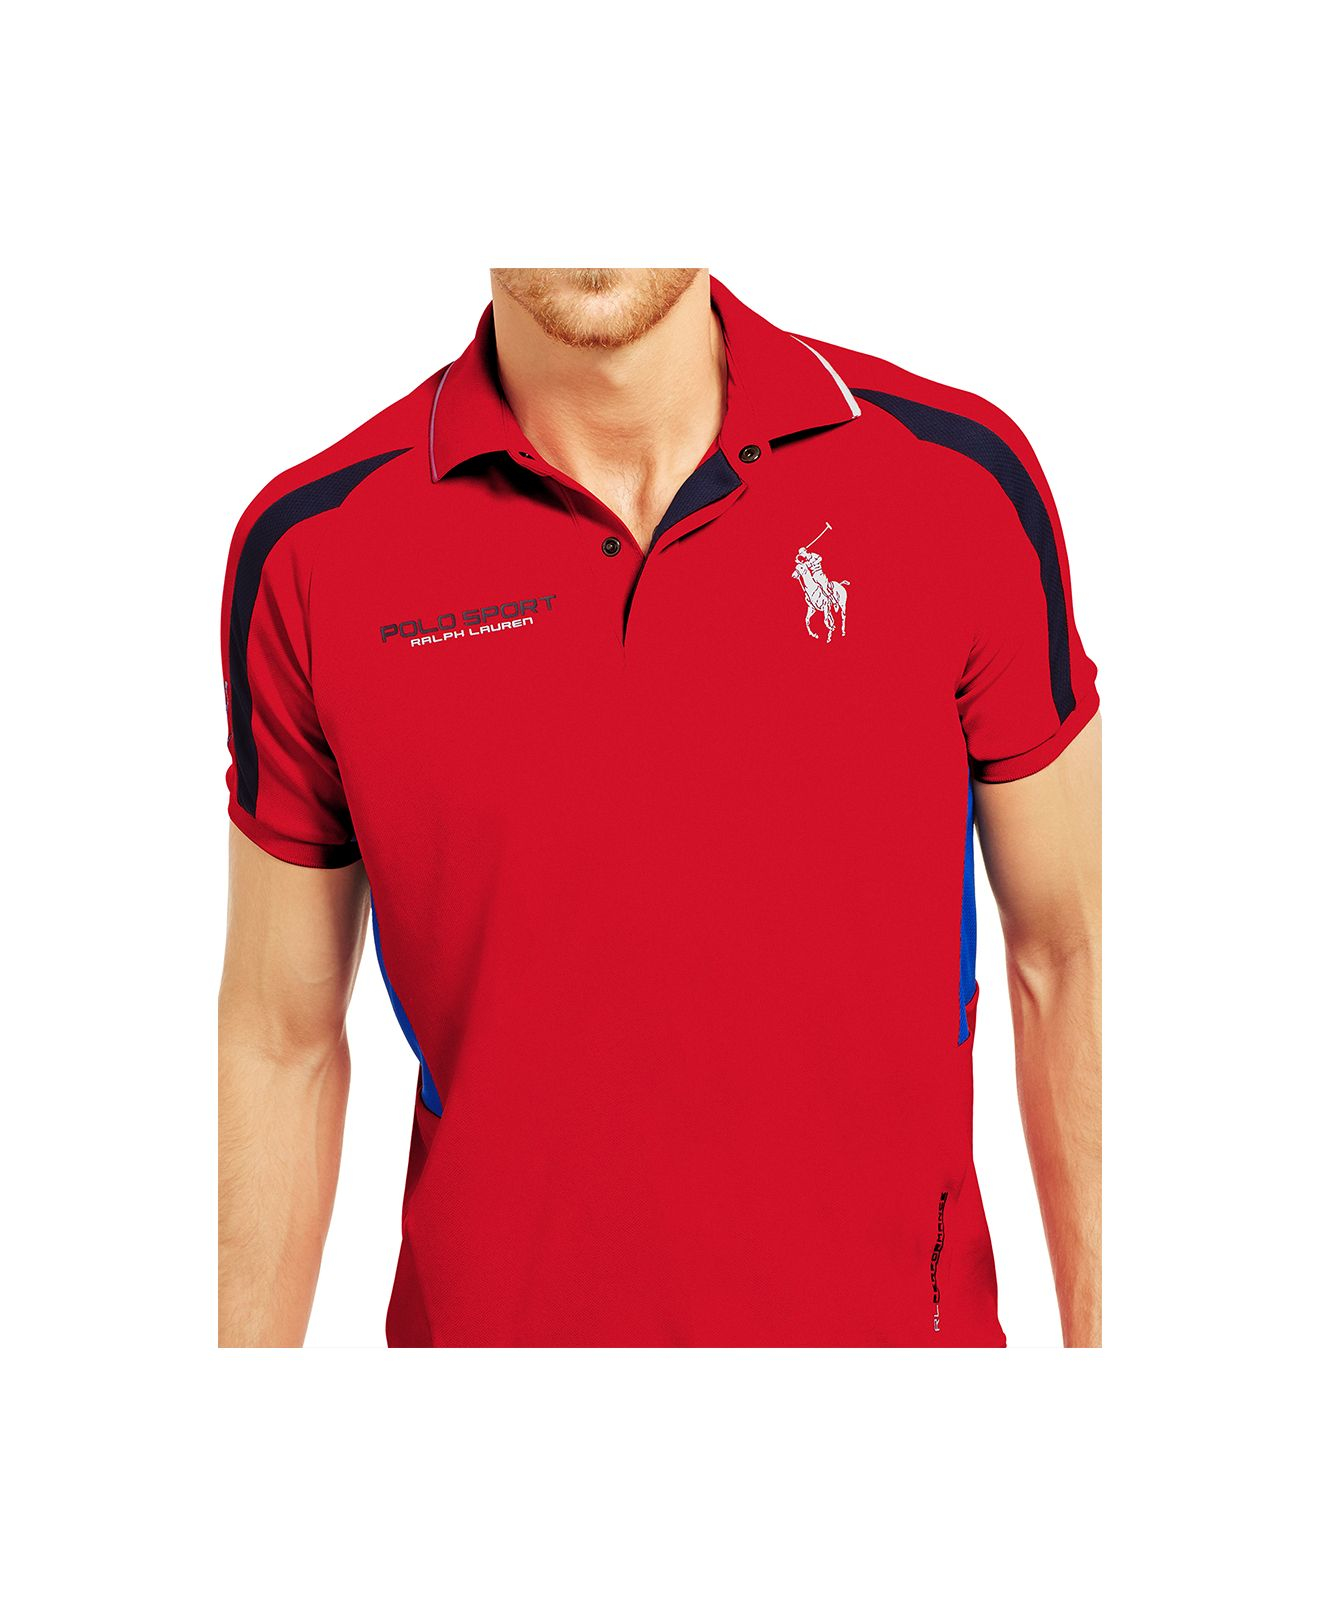 Polo Ralph Lauren Polo Sport Mesh-paneled Jersey Polo in Red for Men - Lyst